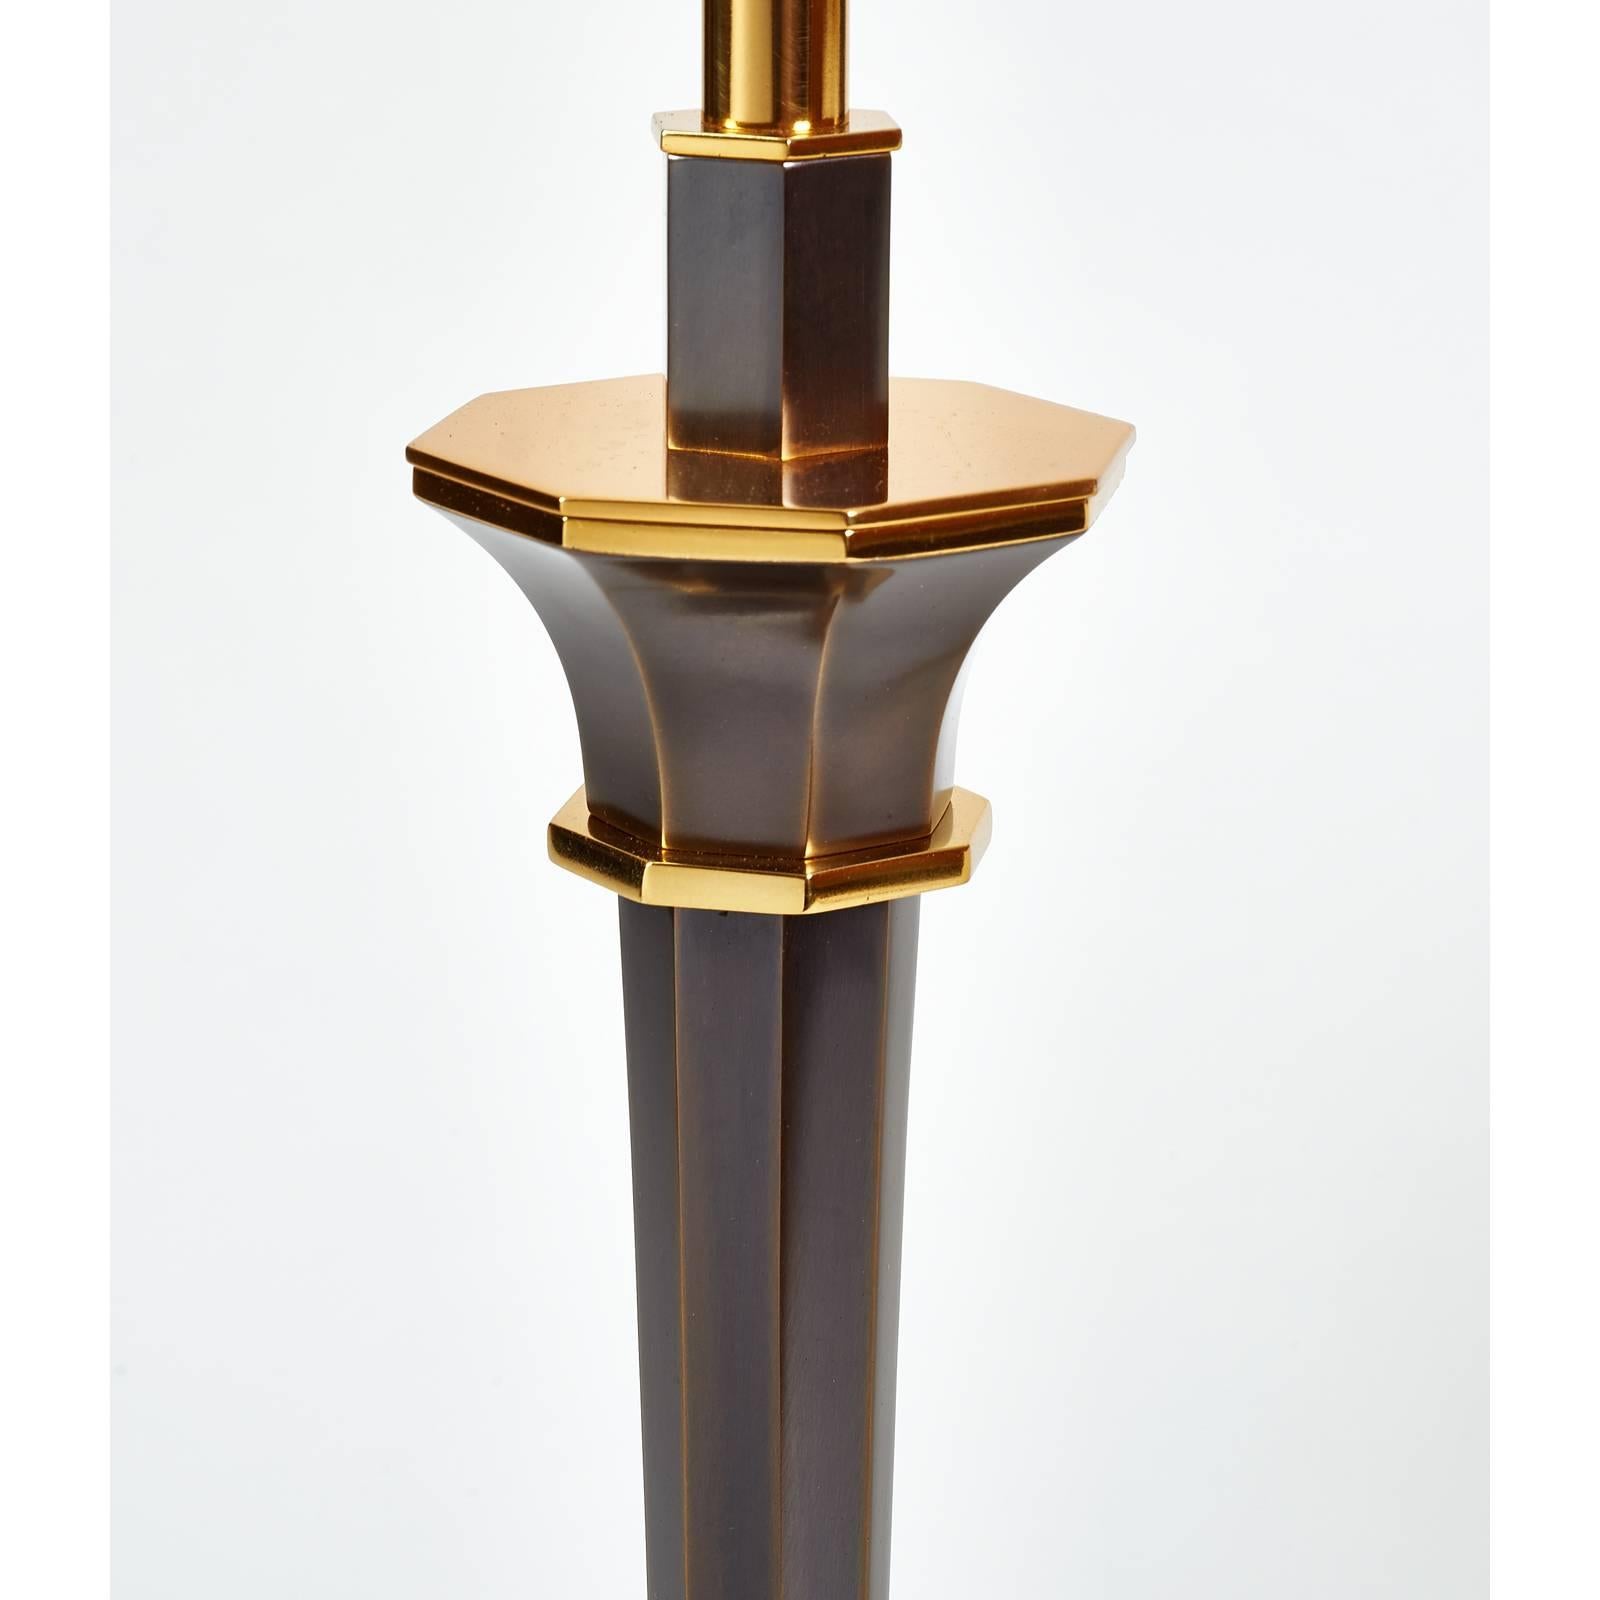 Genet Michon
Table lamp with tapered octagonal shaft
Oxidized and gilt bronze, France, 1950s
Rewired for use in the USA with two standard base bulbs
Dimensions: 17 Ø x 34 H.